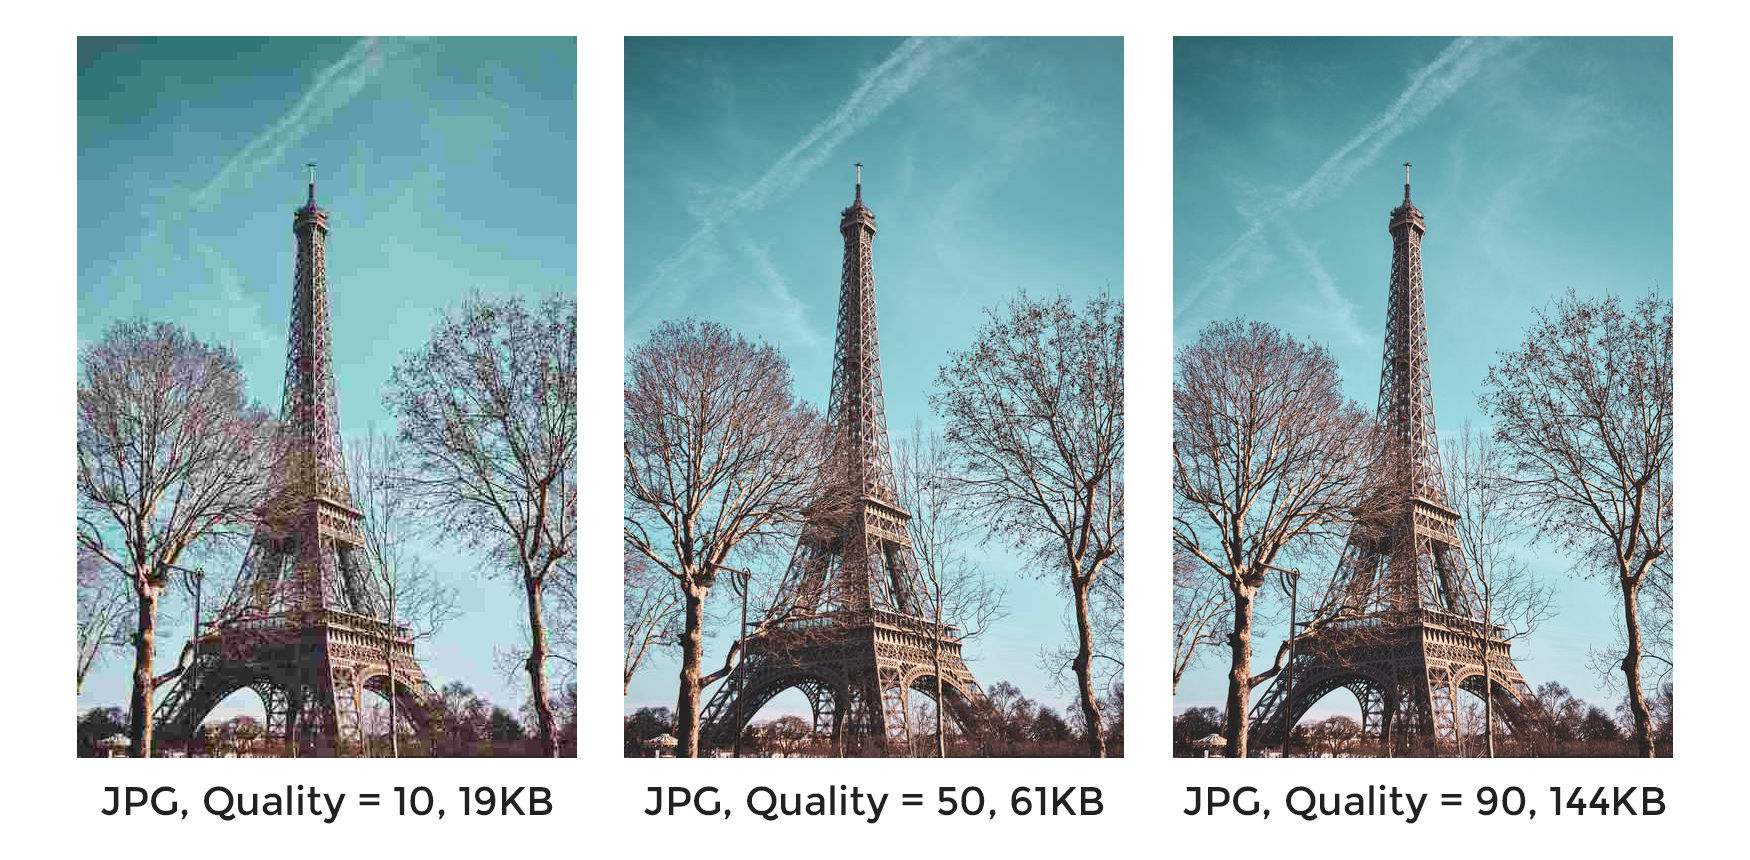 Image quality comparison in the same format